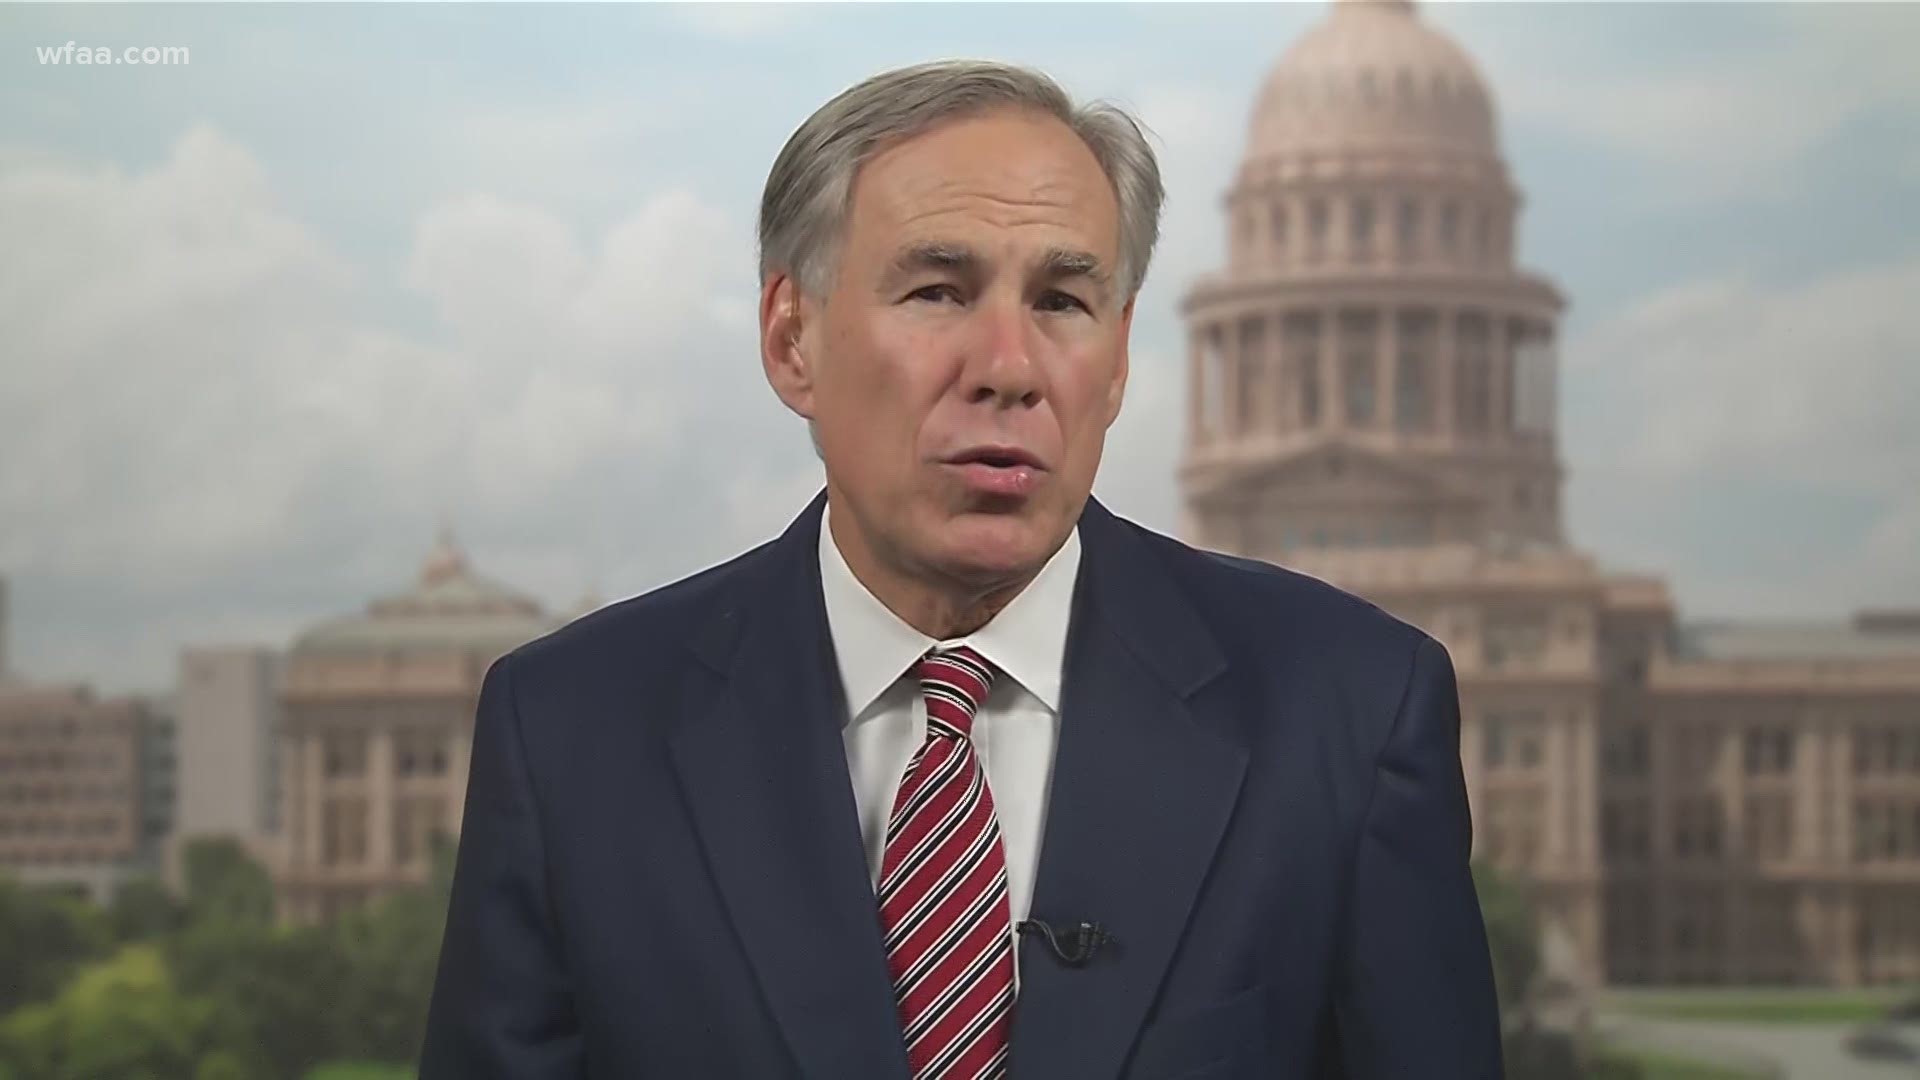 "Bars is the type of setting not made for a pandemic," the Texas governor said of his decision to close bars in the state in response to the COVID-19 outbreak.